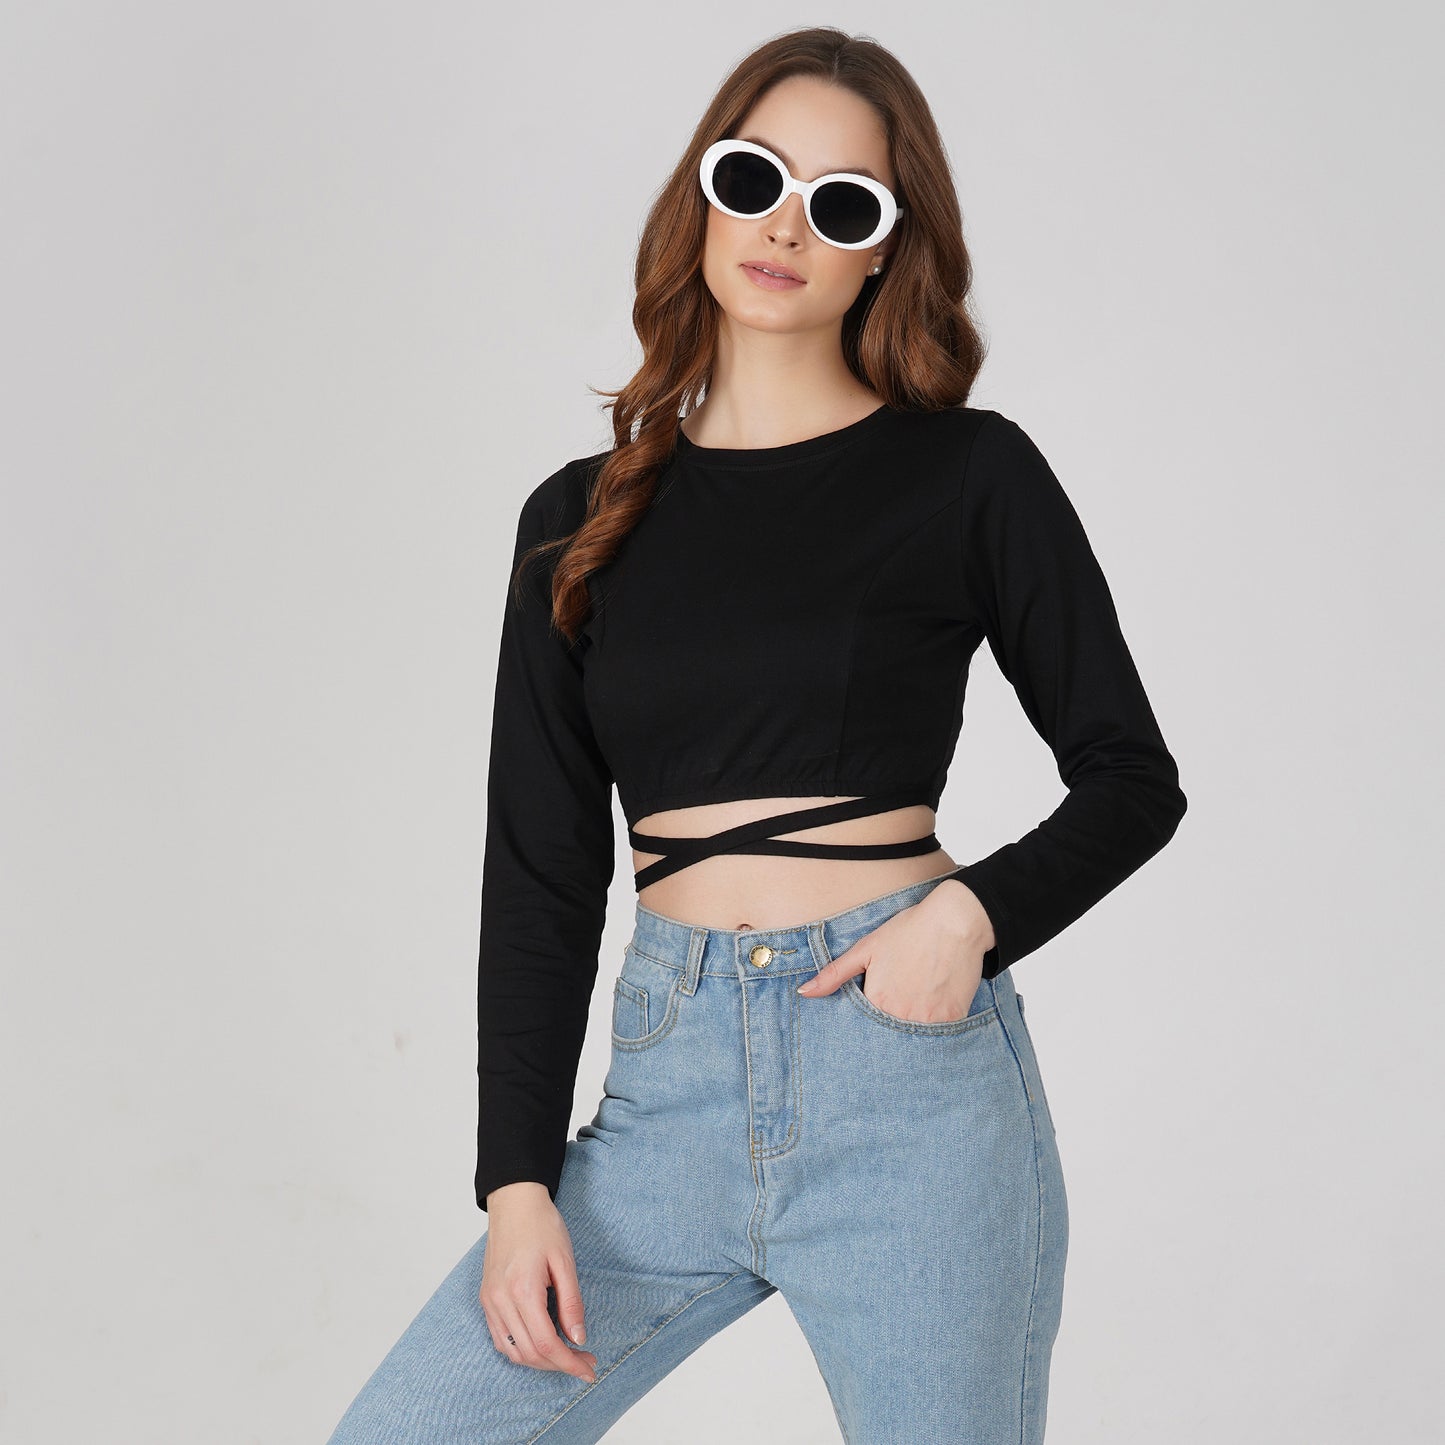 SLAY. Women's Black Full Sleeves Crop Top with Back Wrap